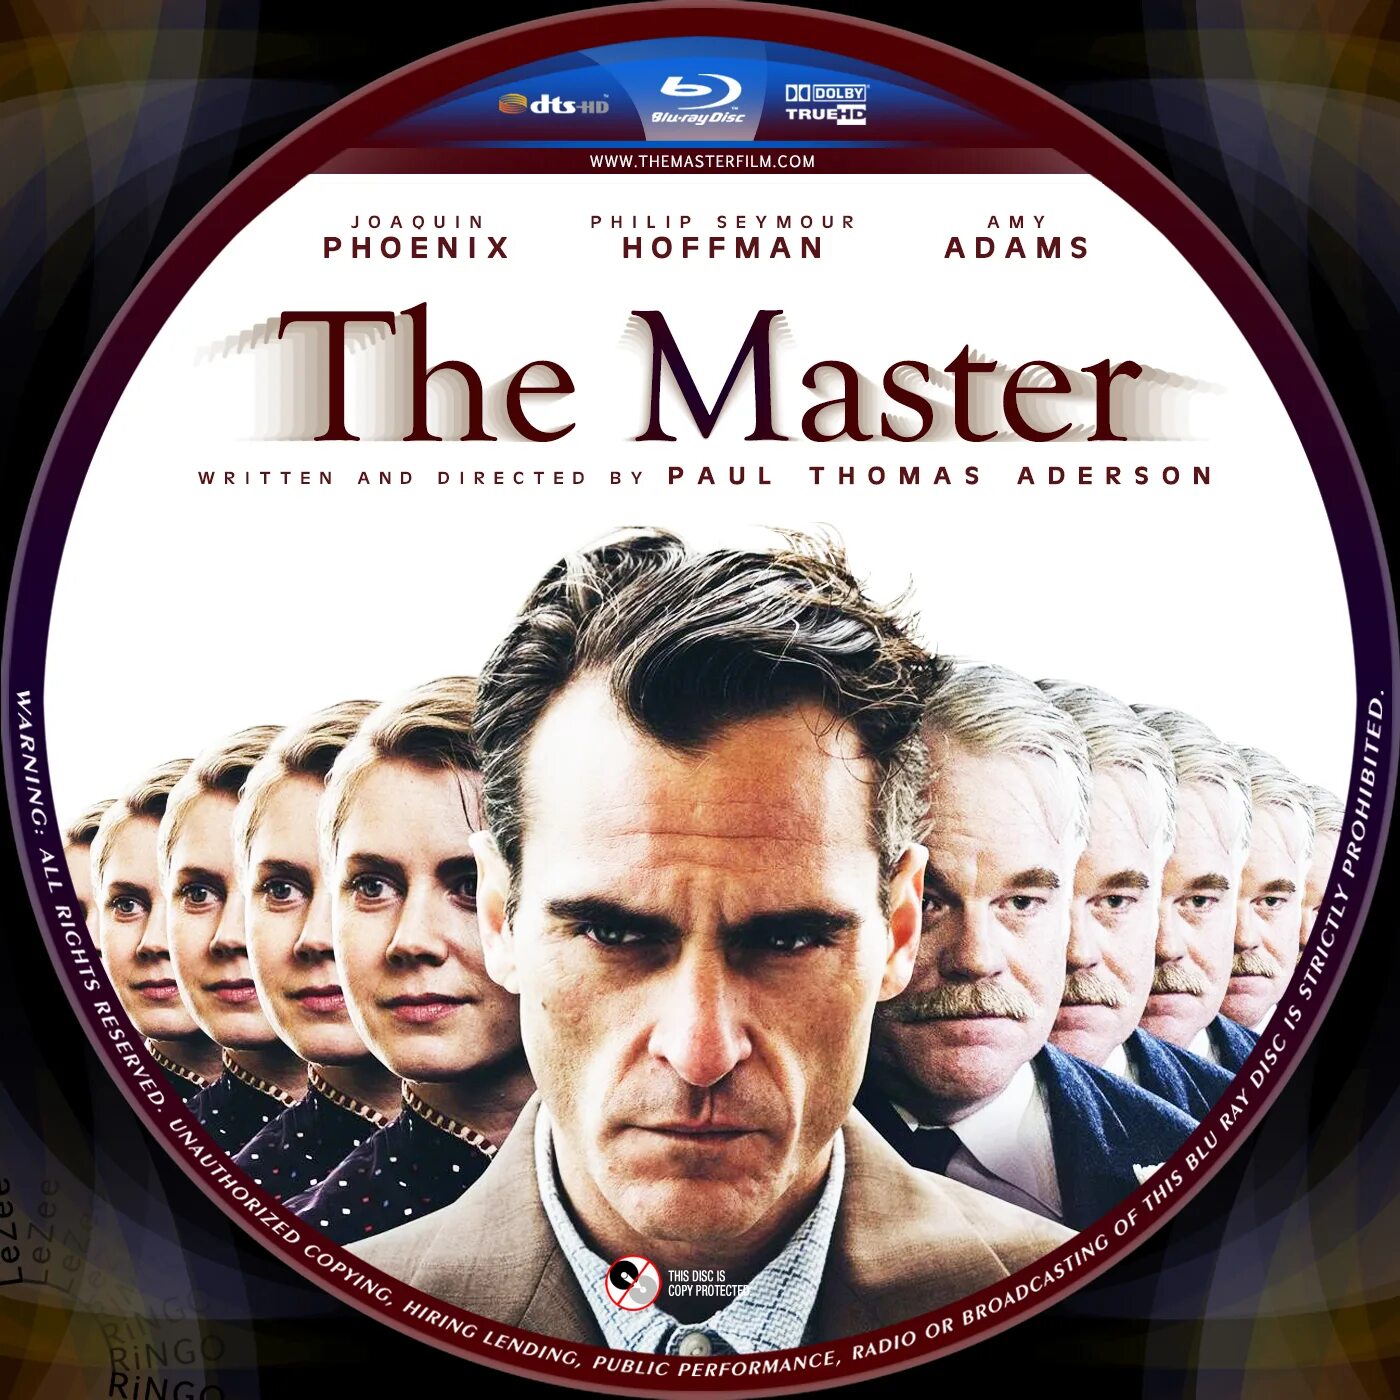 Мастер 2012. The Master 2012 Blu-ray. The Master 2012 poster DVD. 2012 обложка